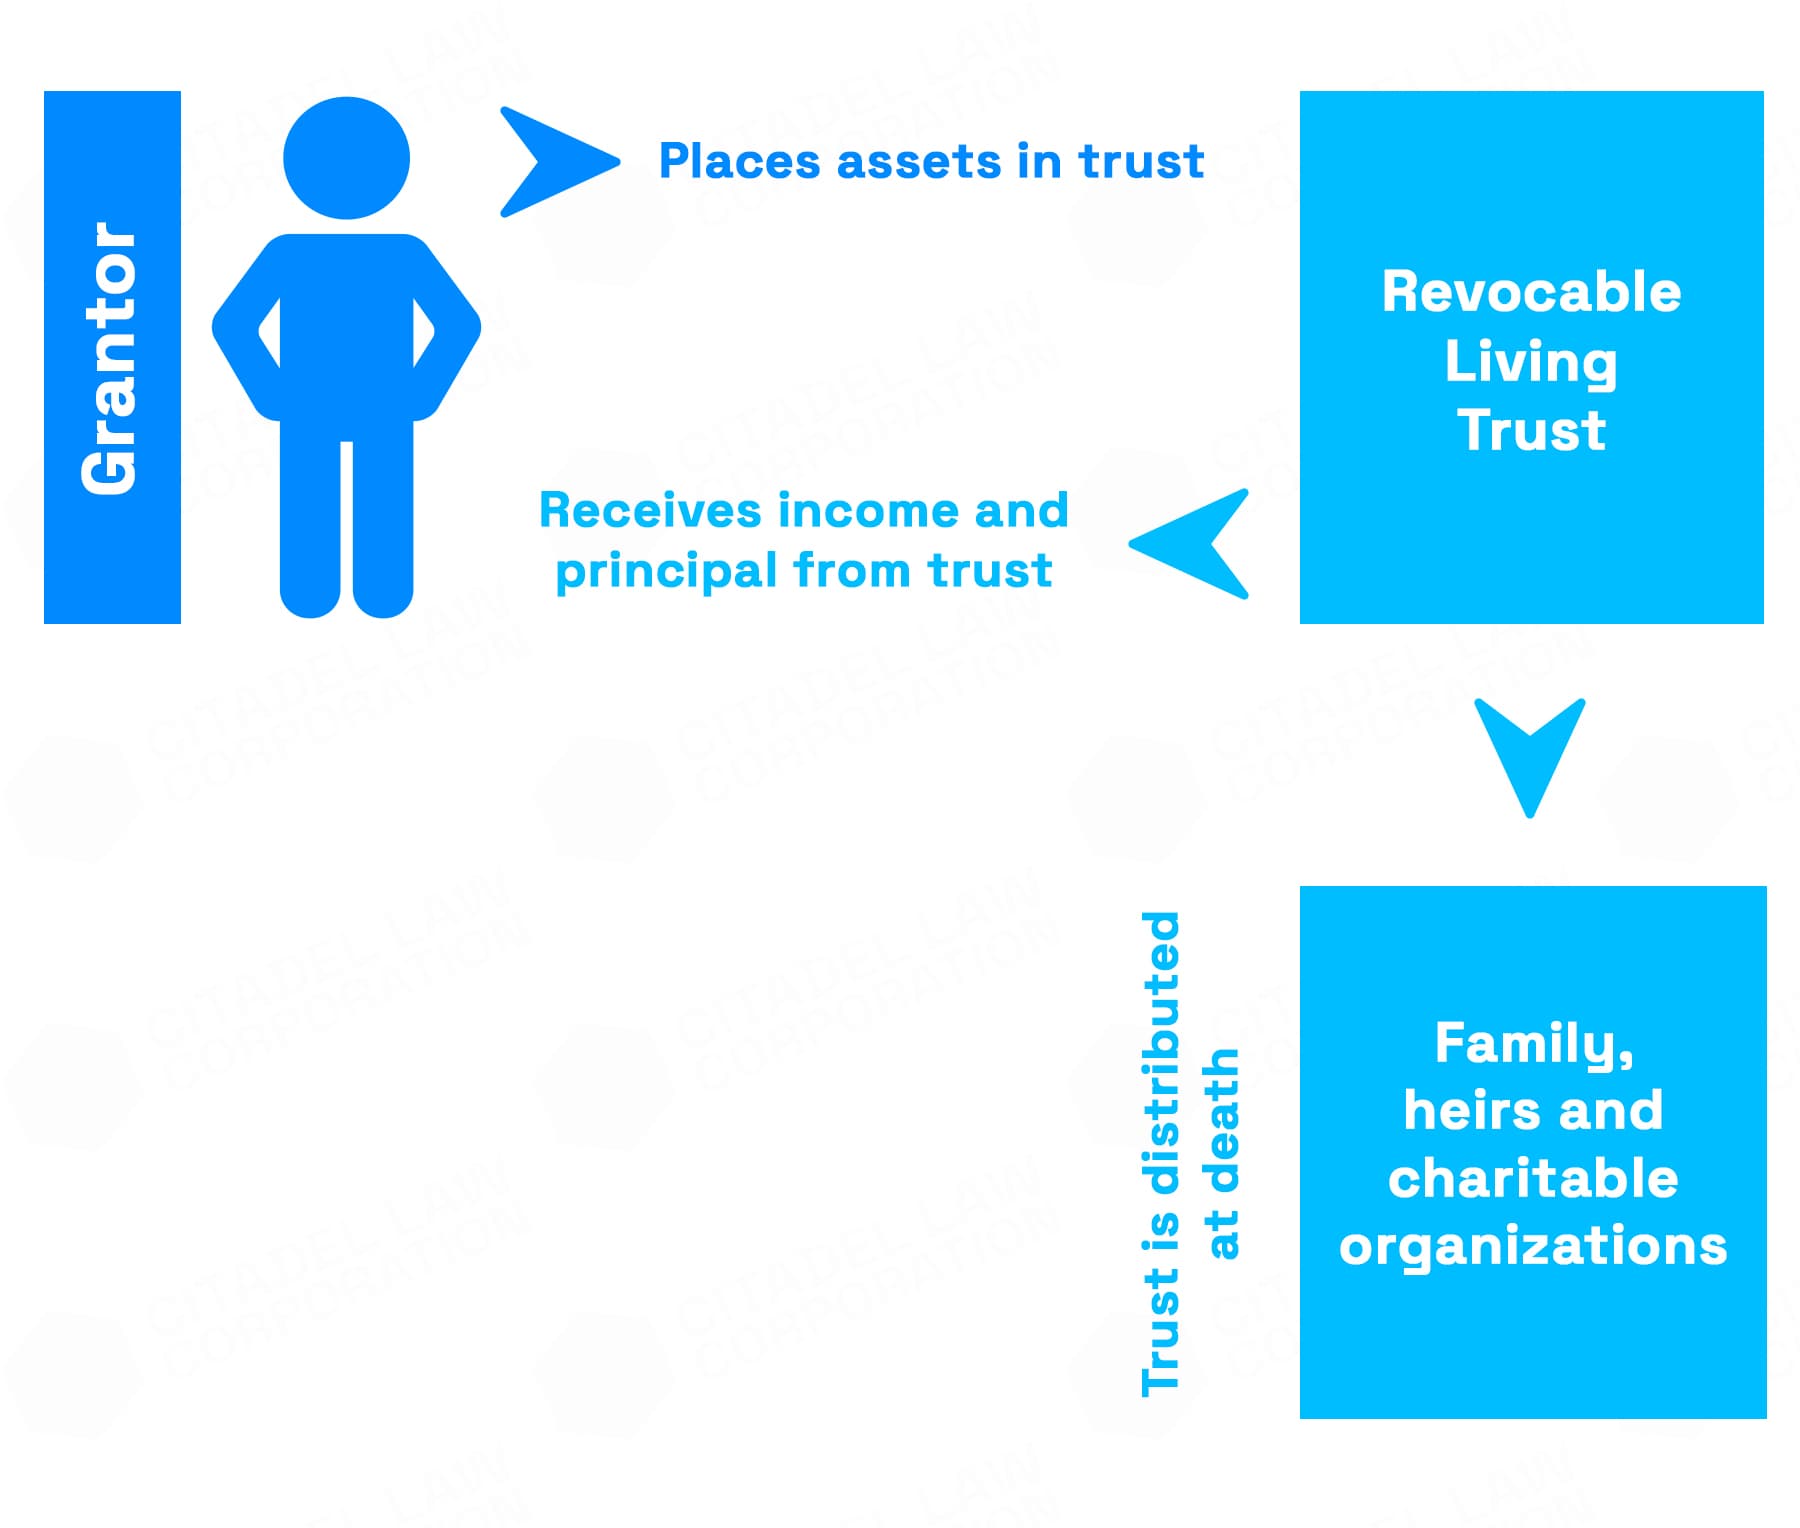 Revocable living trust